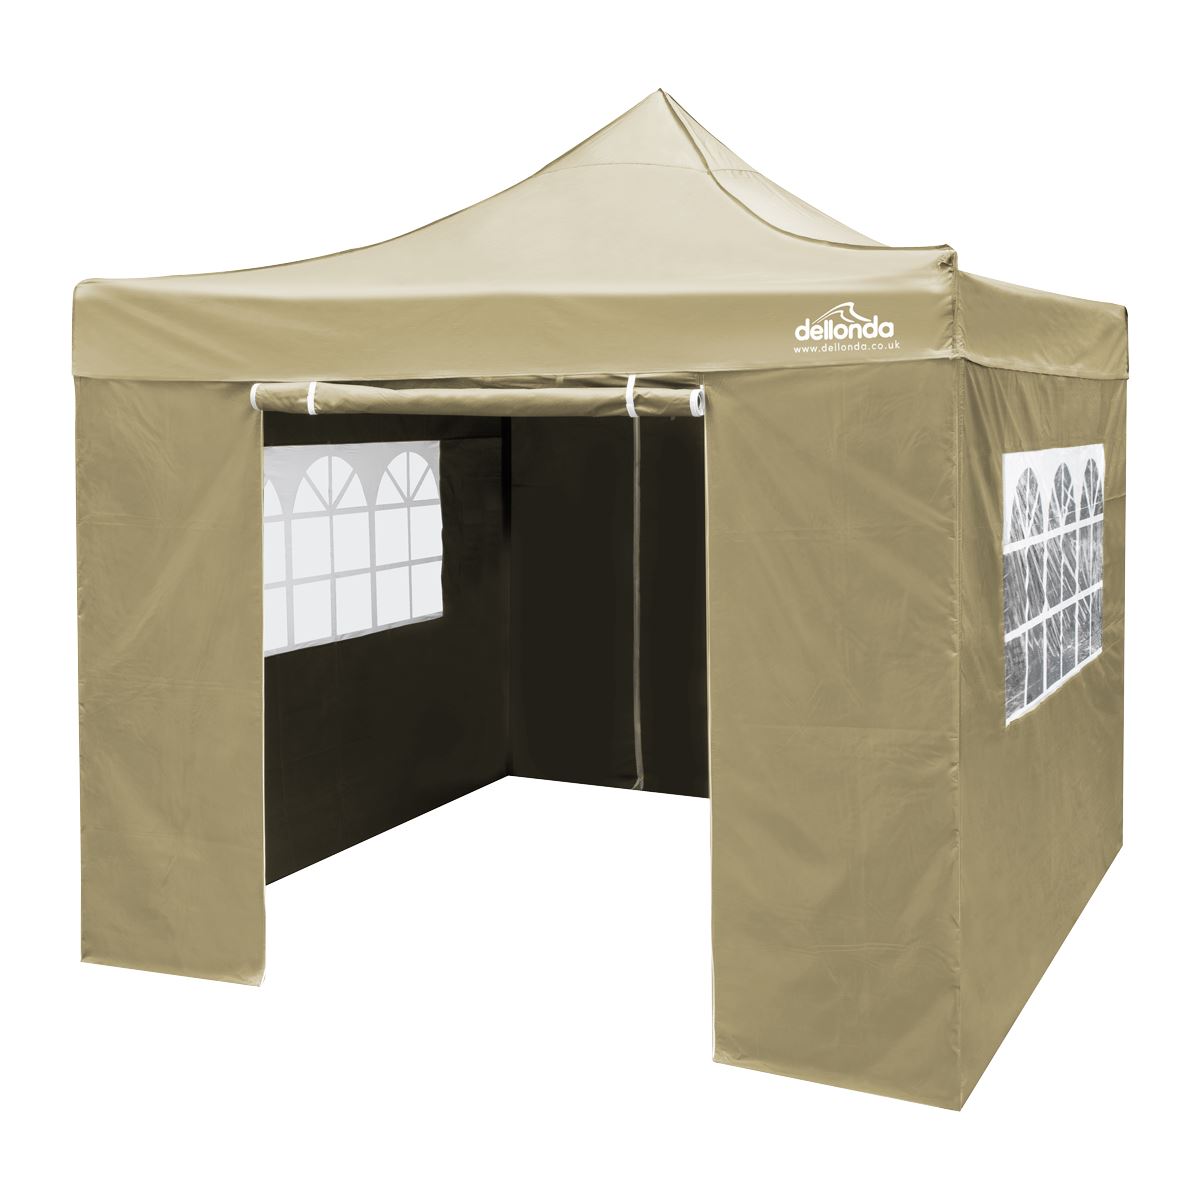 Dellonda Premium 2x2m Pop-Up Gazebo & Side Walls, PVC Coated, Water Resistant Fabric, Supplied with Carry Bag, Rope, Stakes & Weight Bags - Beige